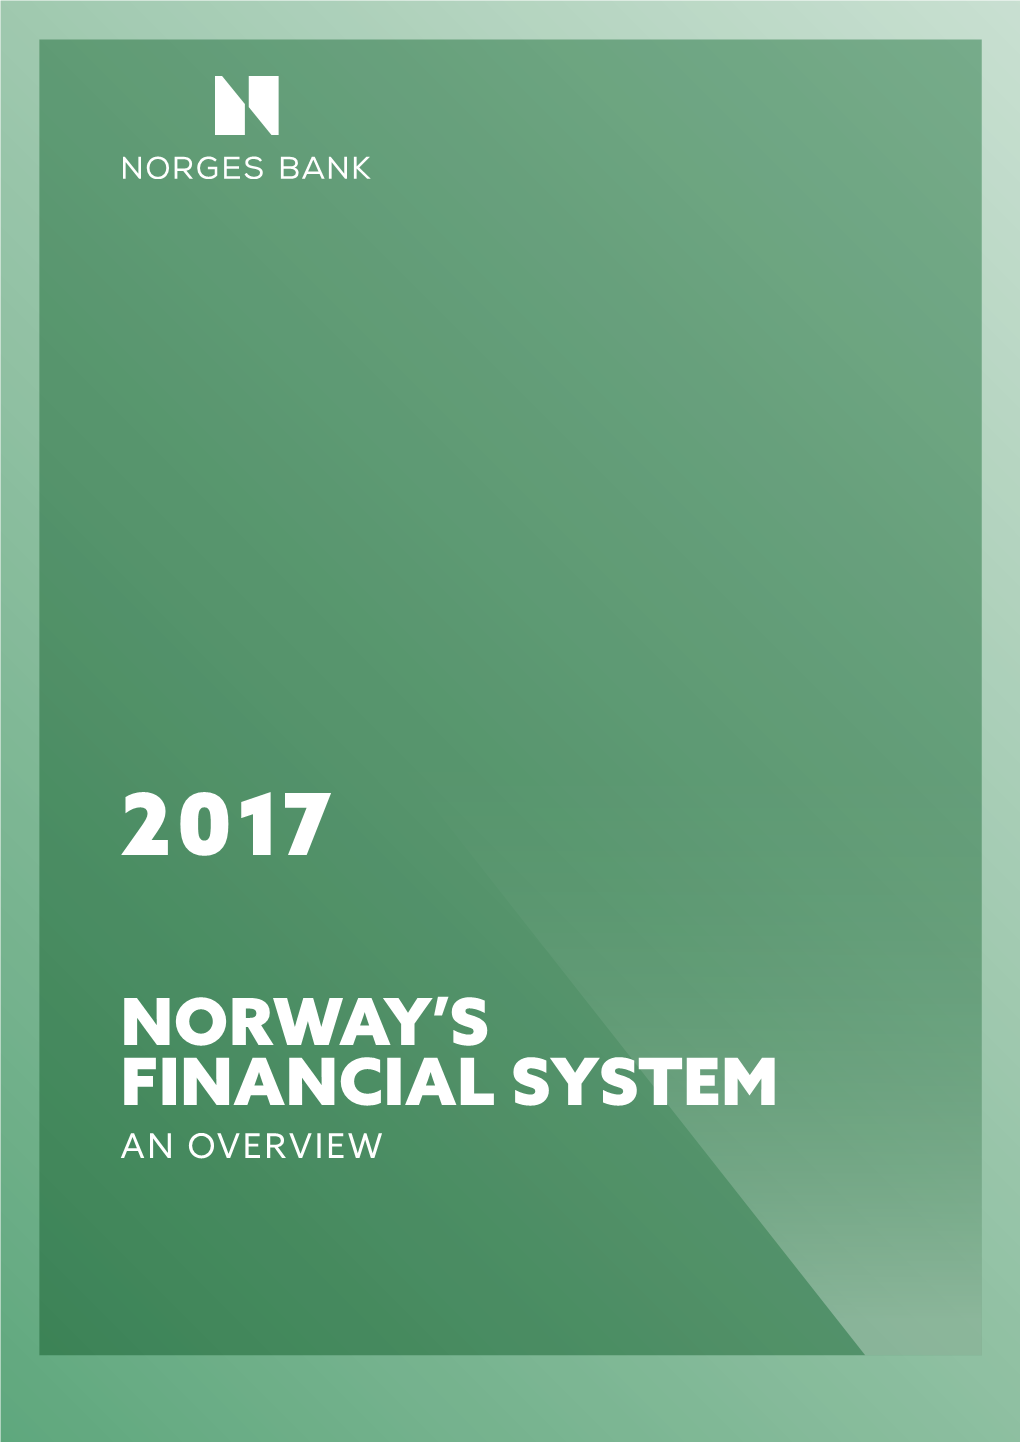 Norway's Financial System 2017 Introduction the Financial System